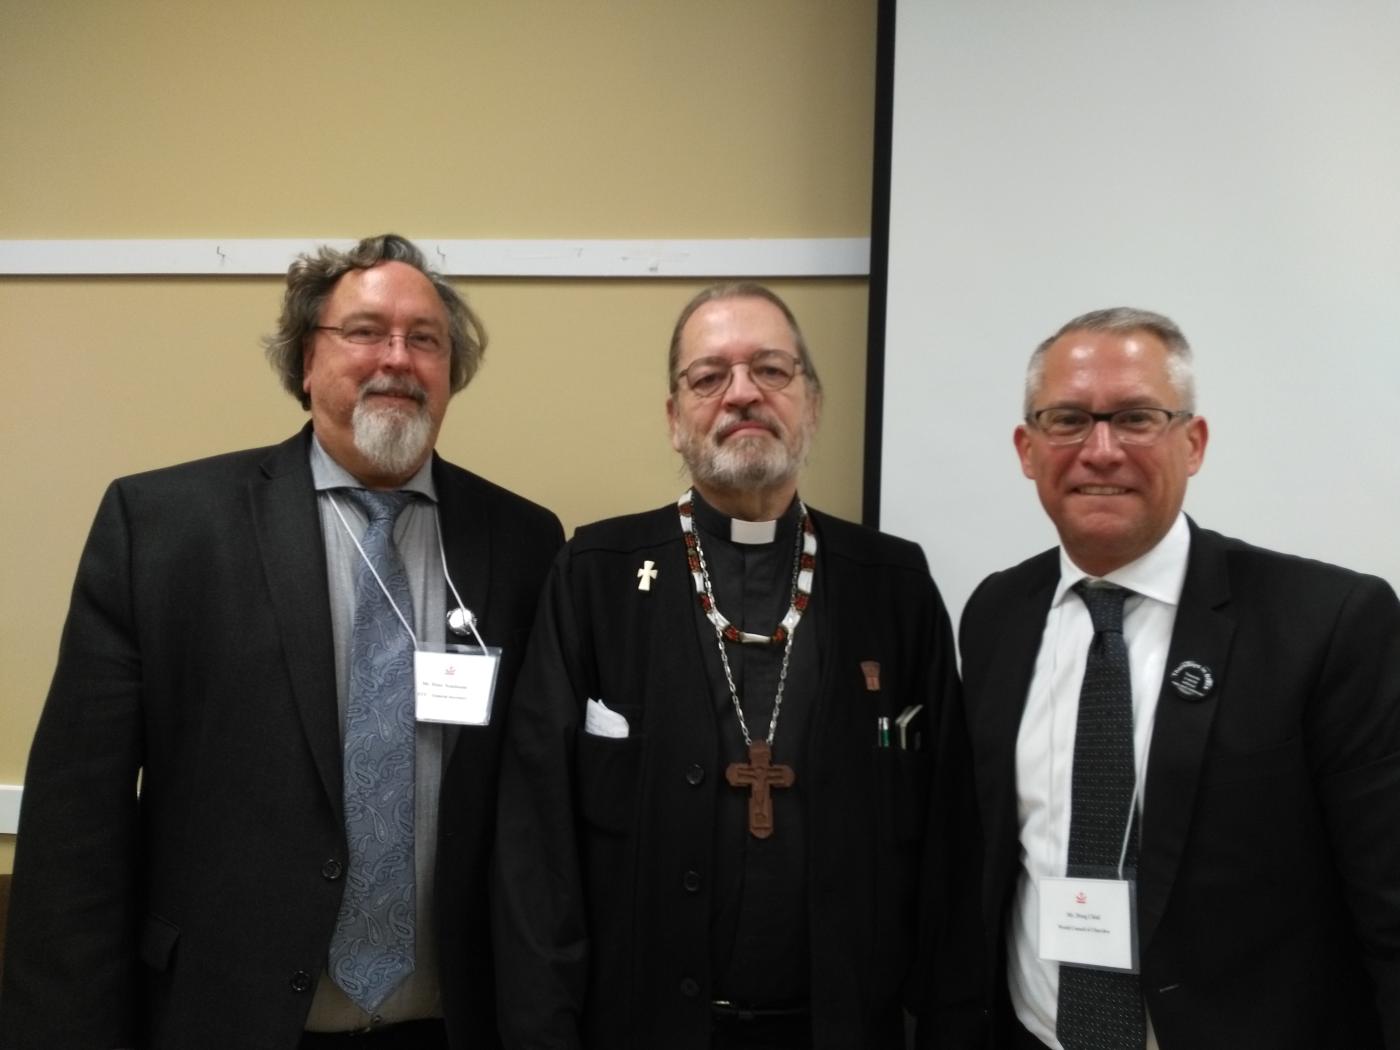 CCC general secretary Peter Noteboom, WCC North American president Bishop Mark MacDonald and Douglas Chial, WCC income manager.